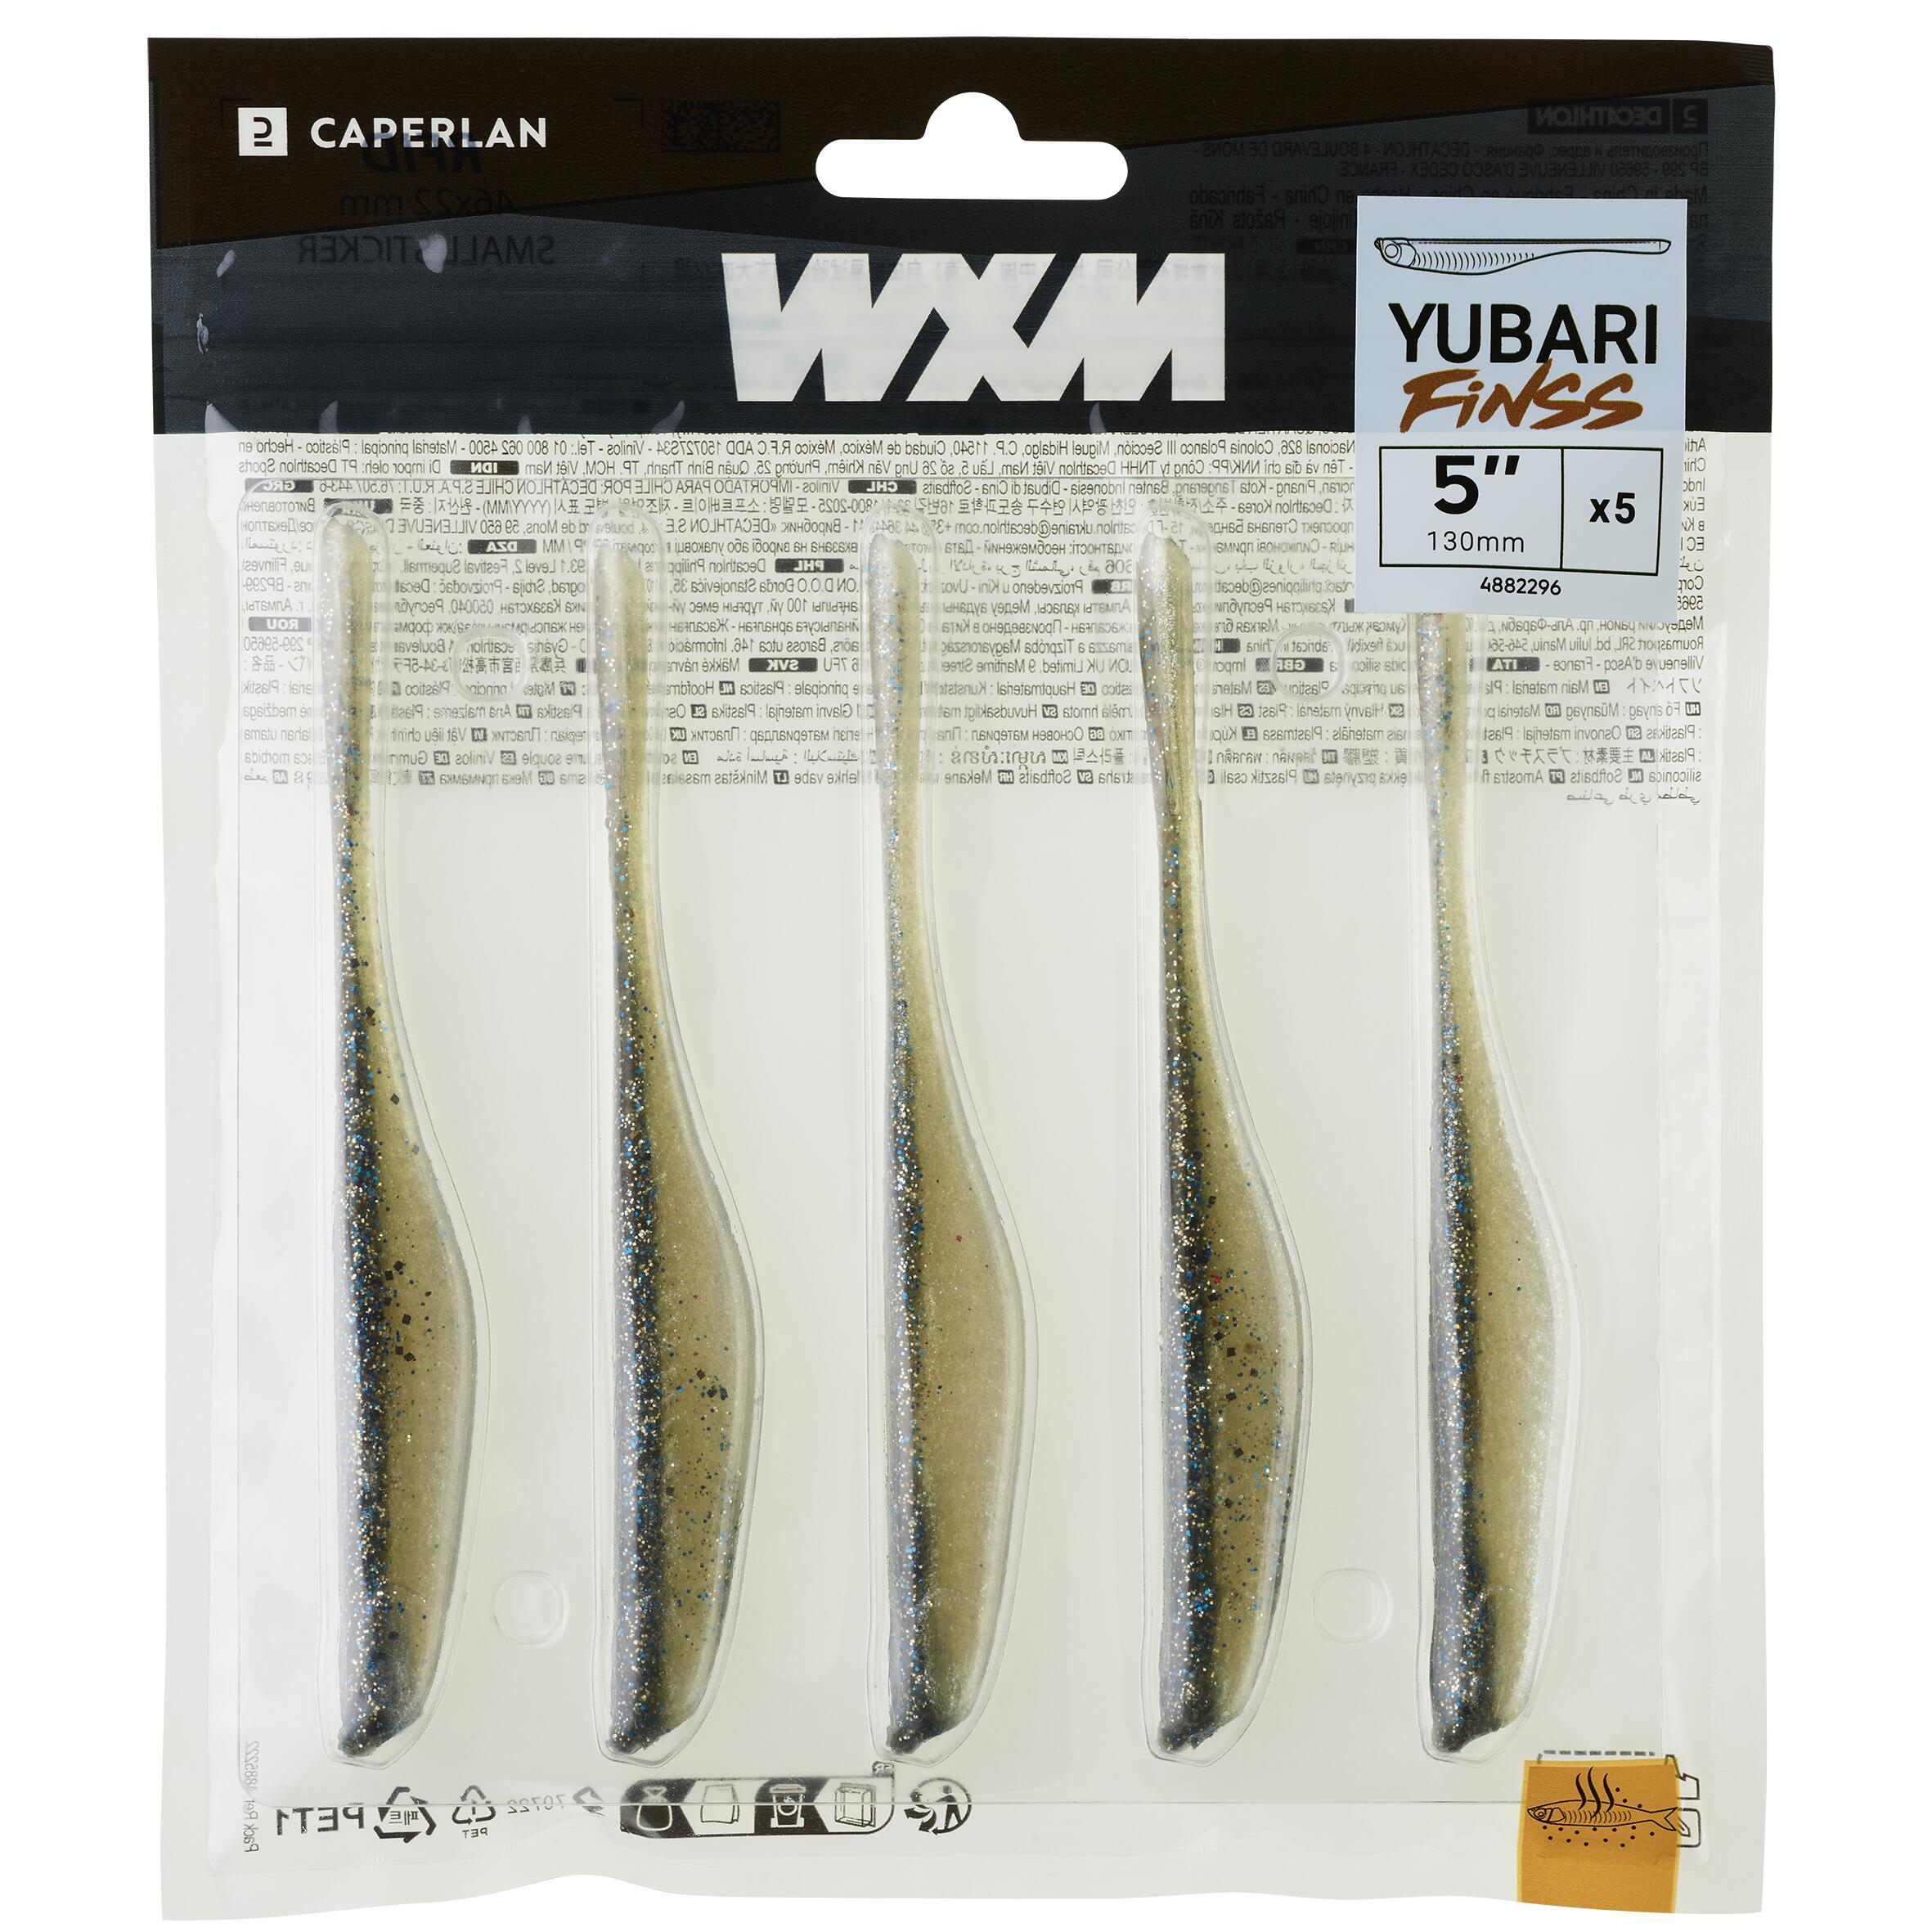 Finesse Soft Lure with Wxm -Yubari Finss 130 Attractant Fish